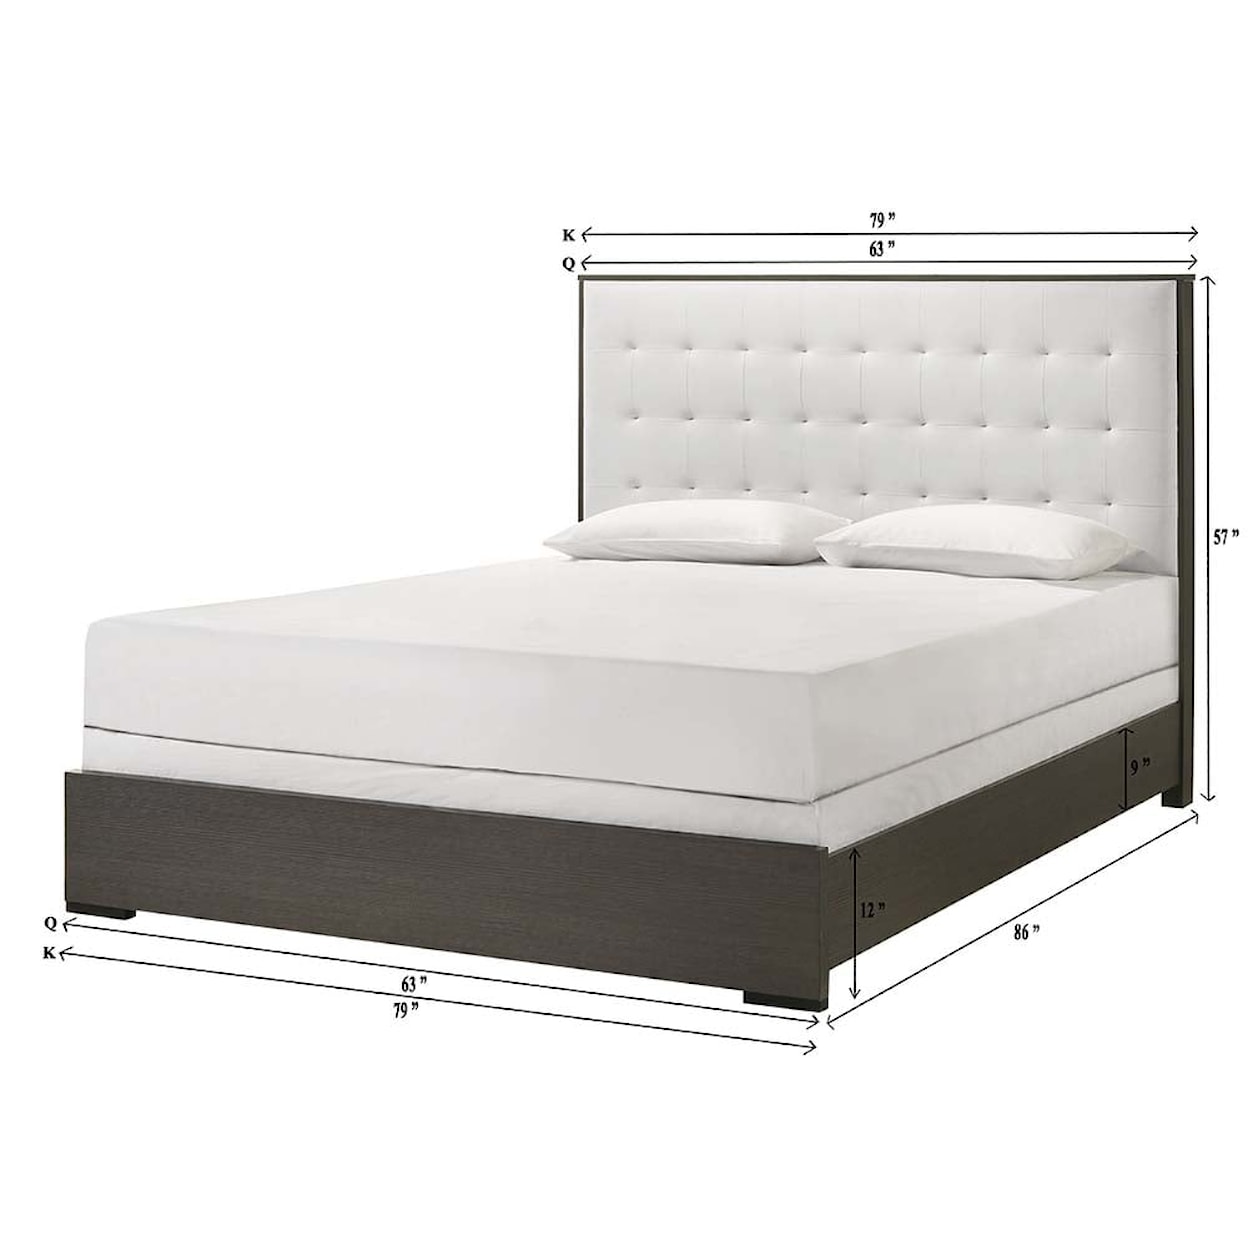 Crown Mark SHARPE Queen Upholstered Bed